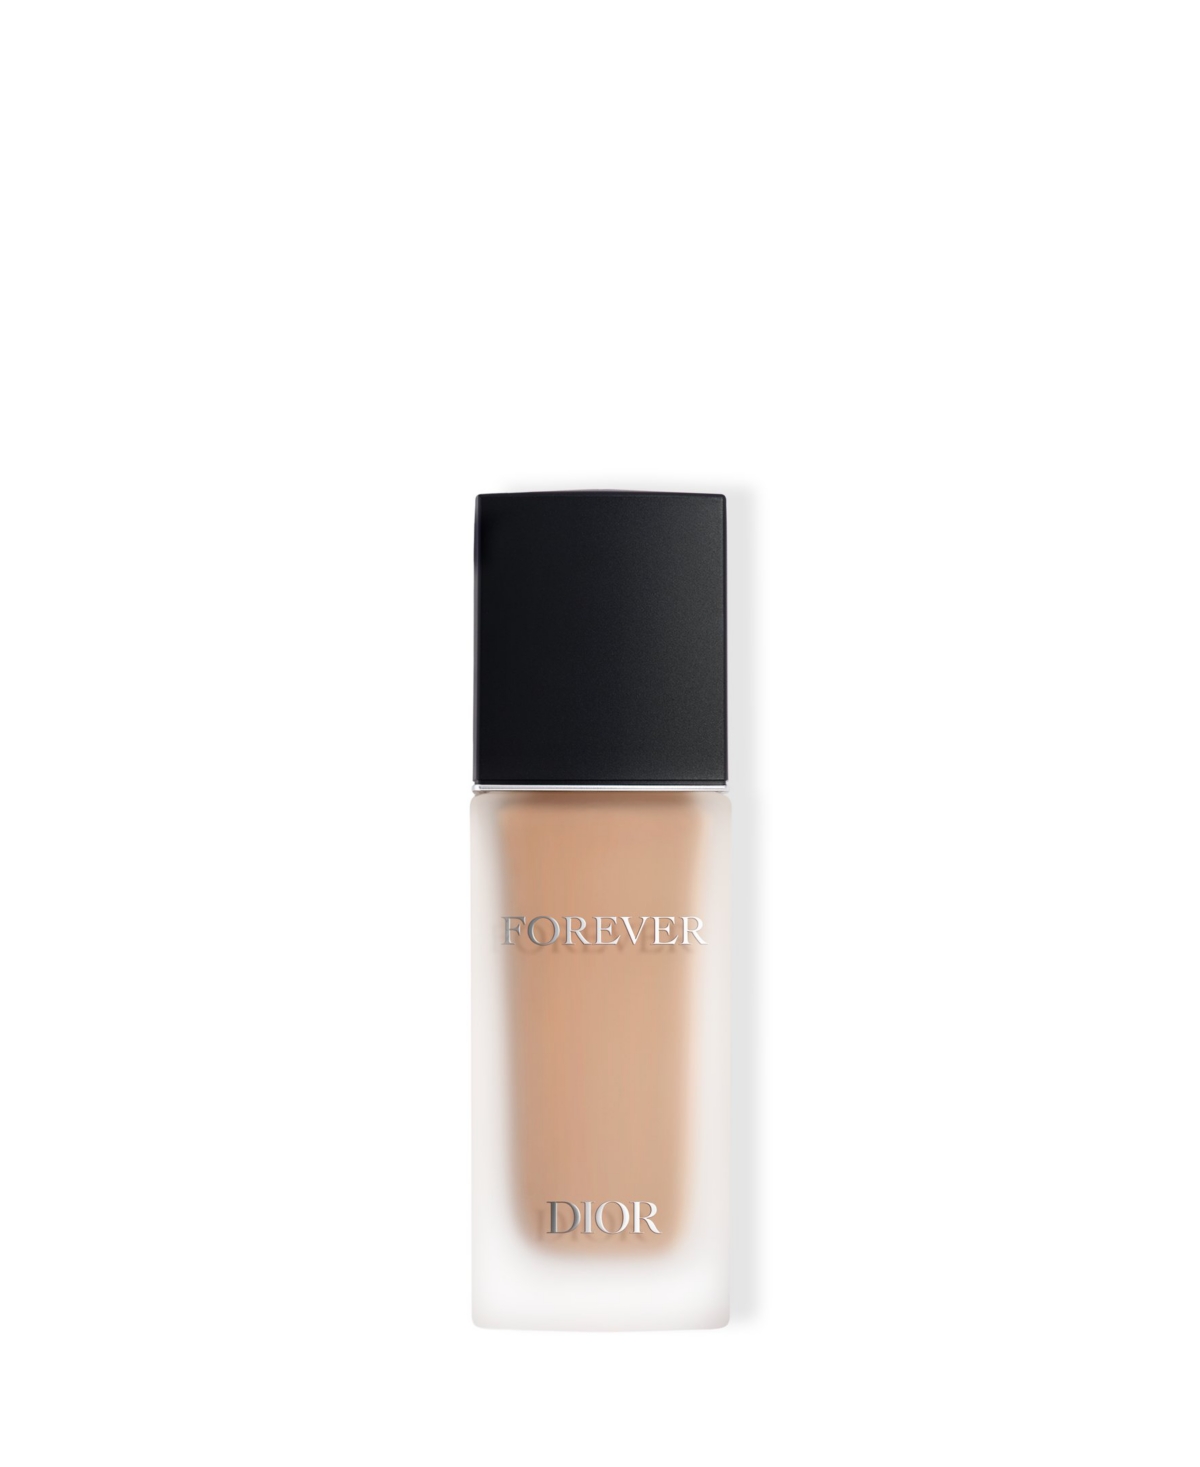 Dior Forever Matte Skincare Foundation Spf 15 In Cool Rosy (light Skin With Cool Rosy Und